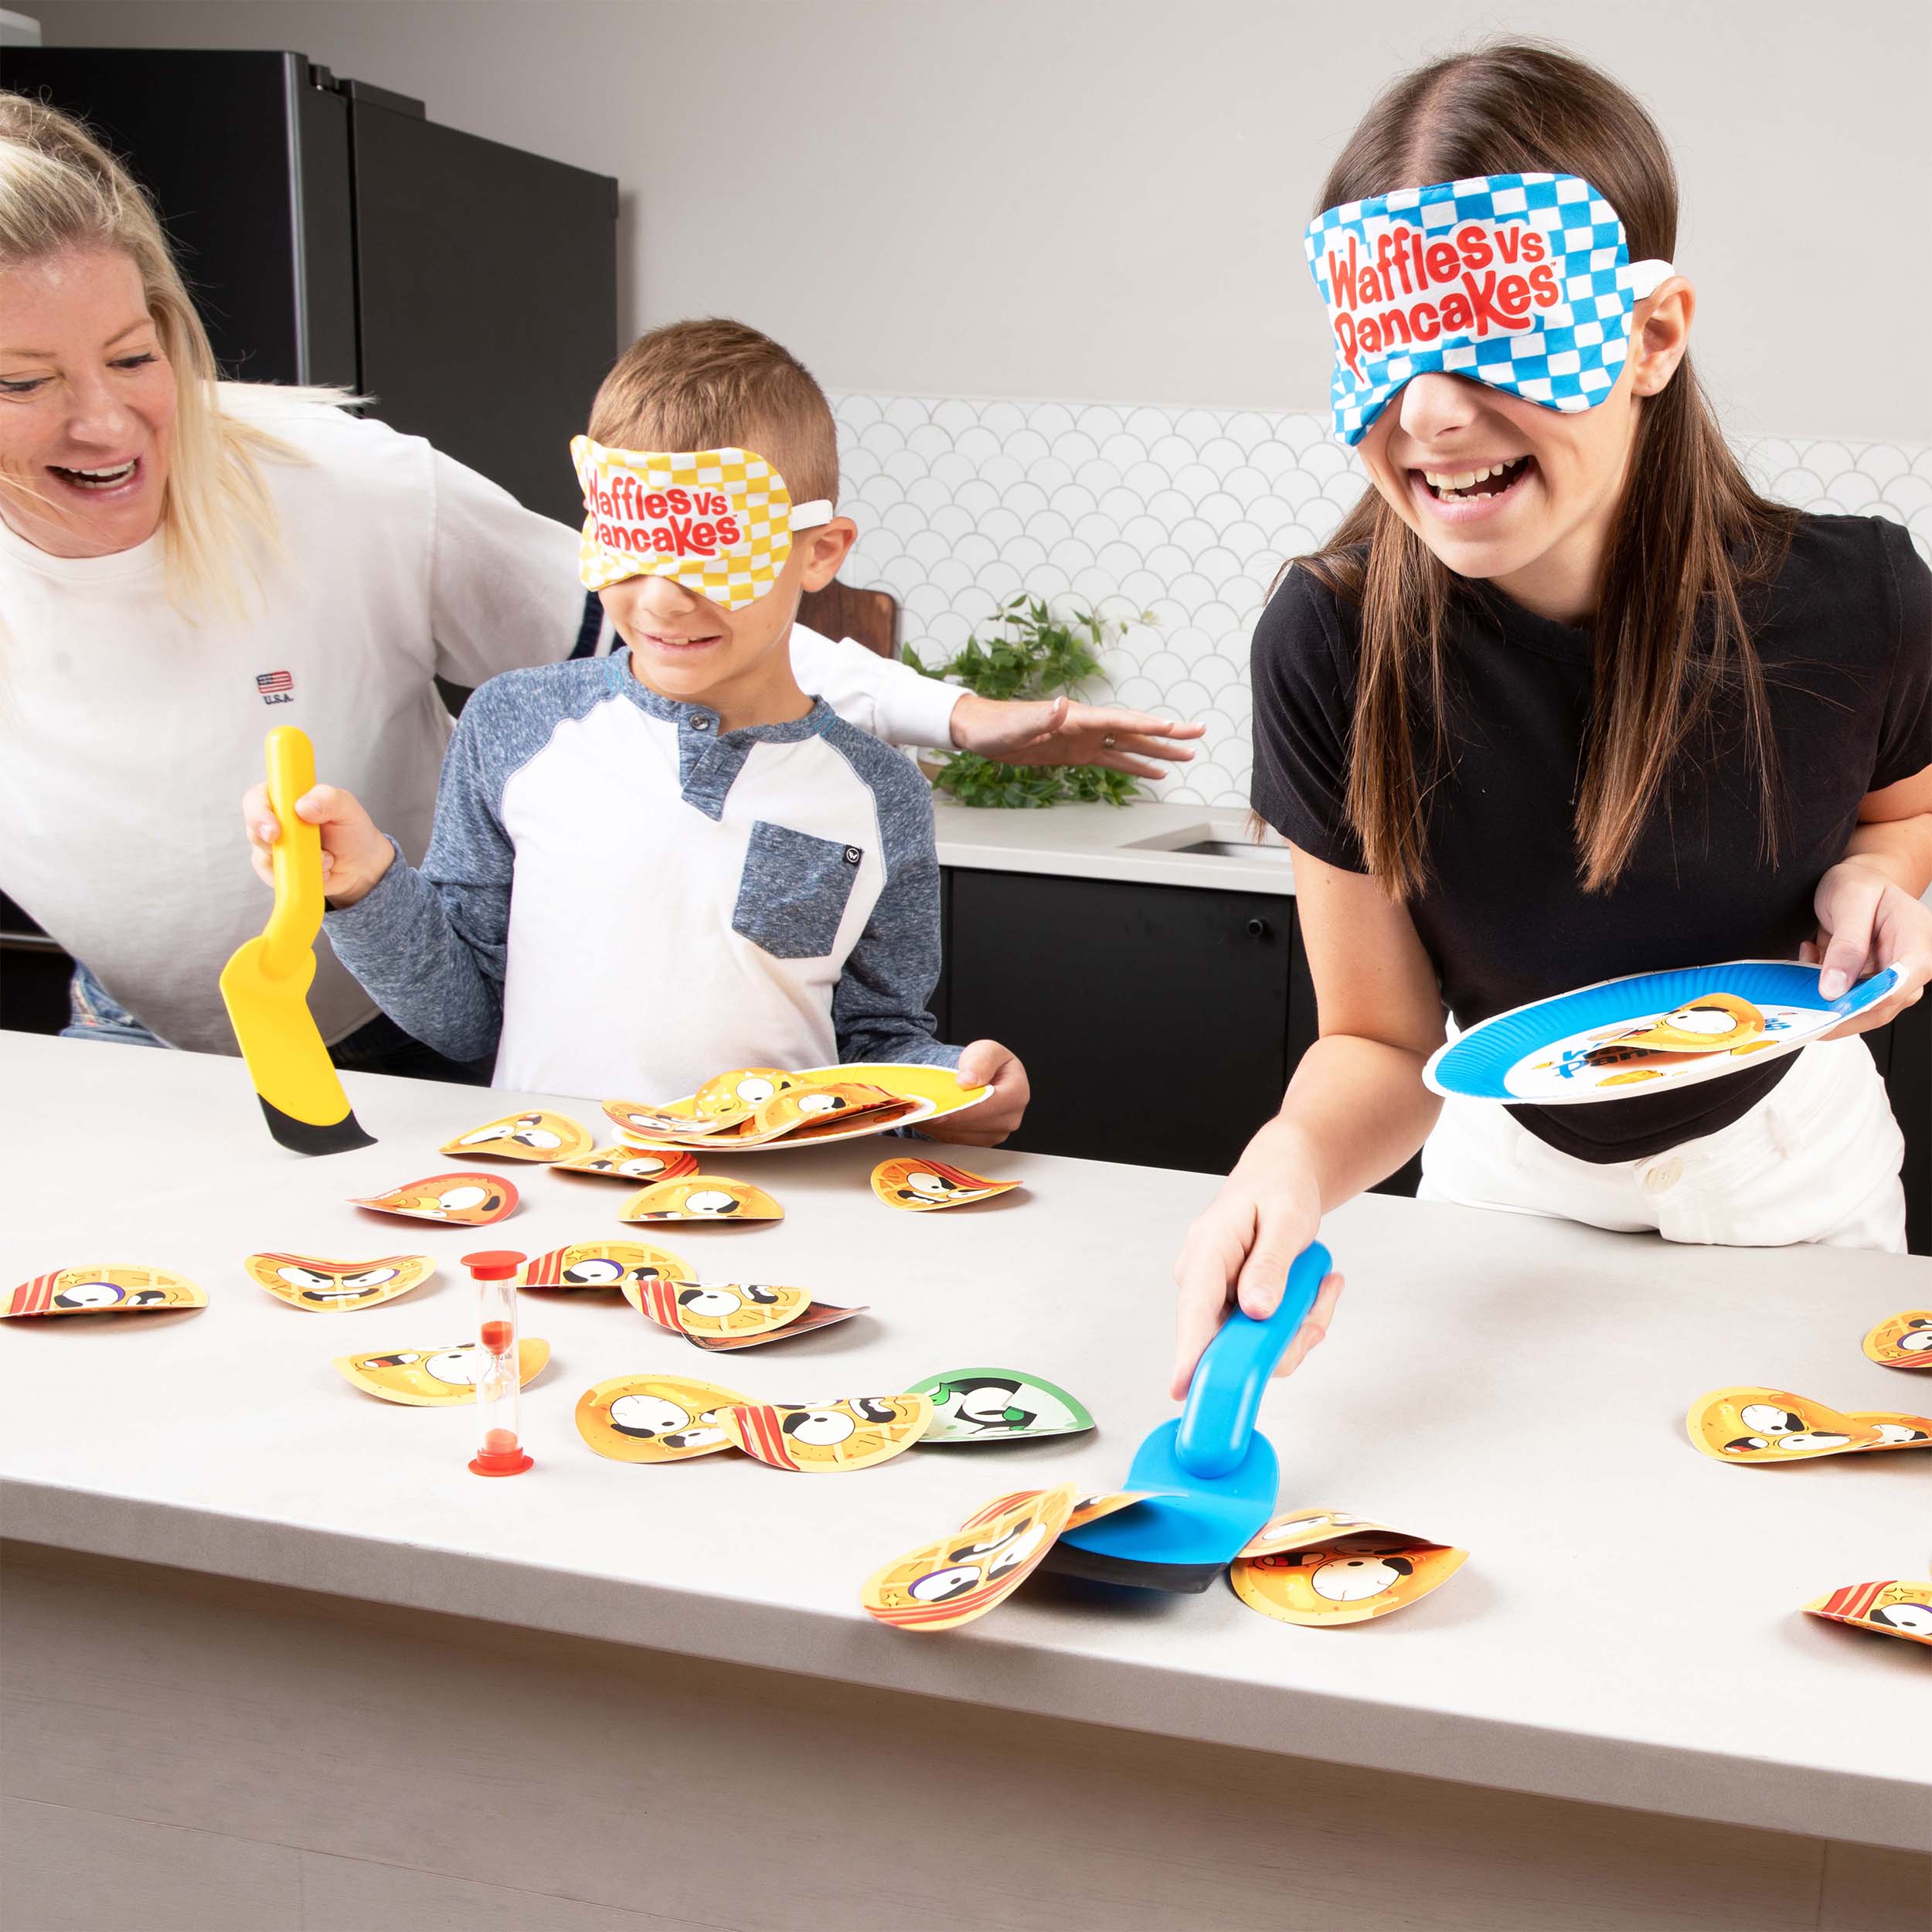 Waffles vs Pancakes - The Breakfast Scoop Up Game for Families